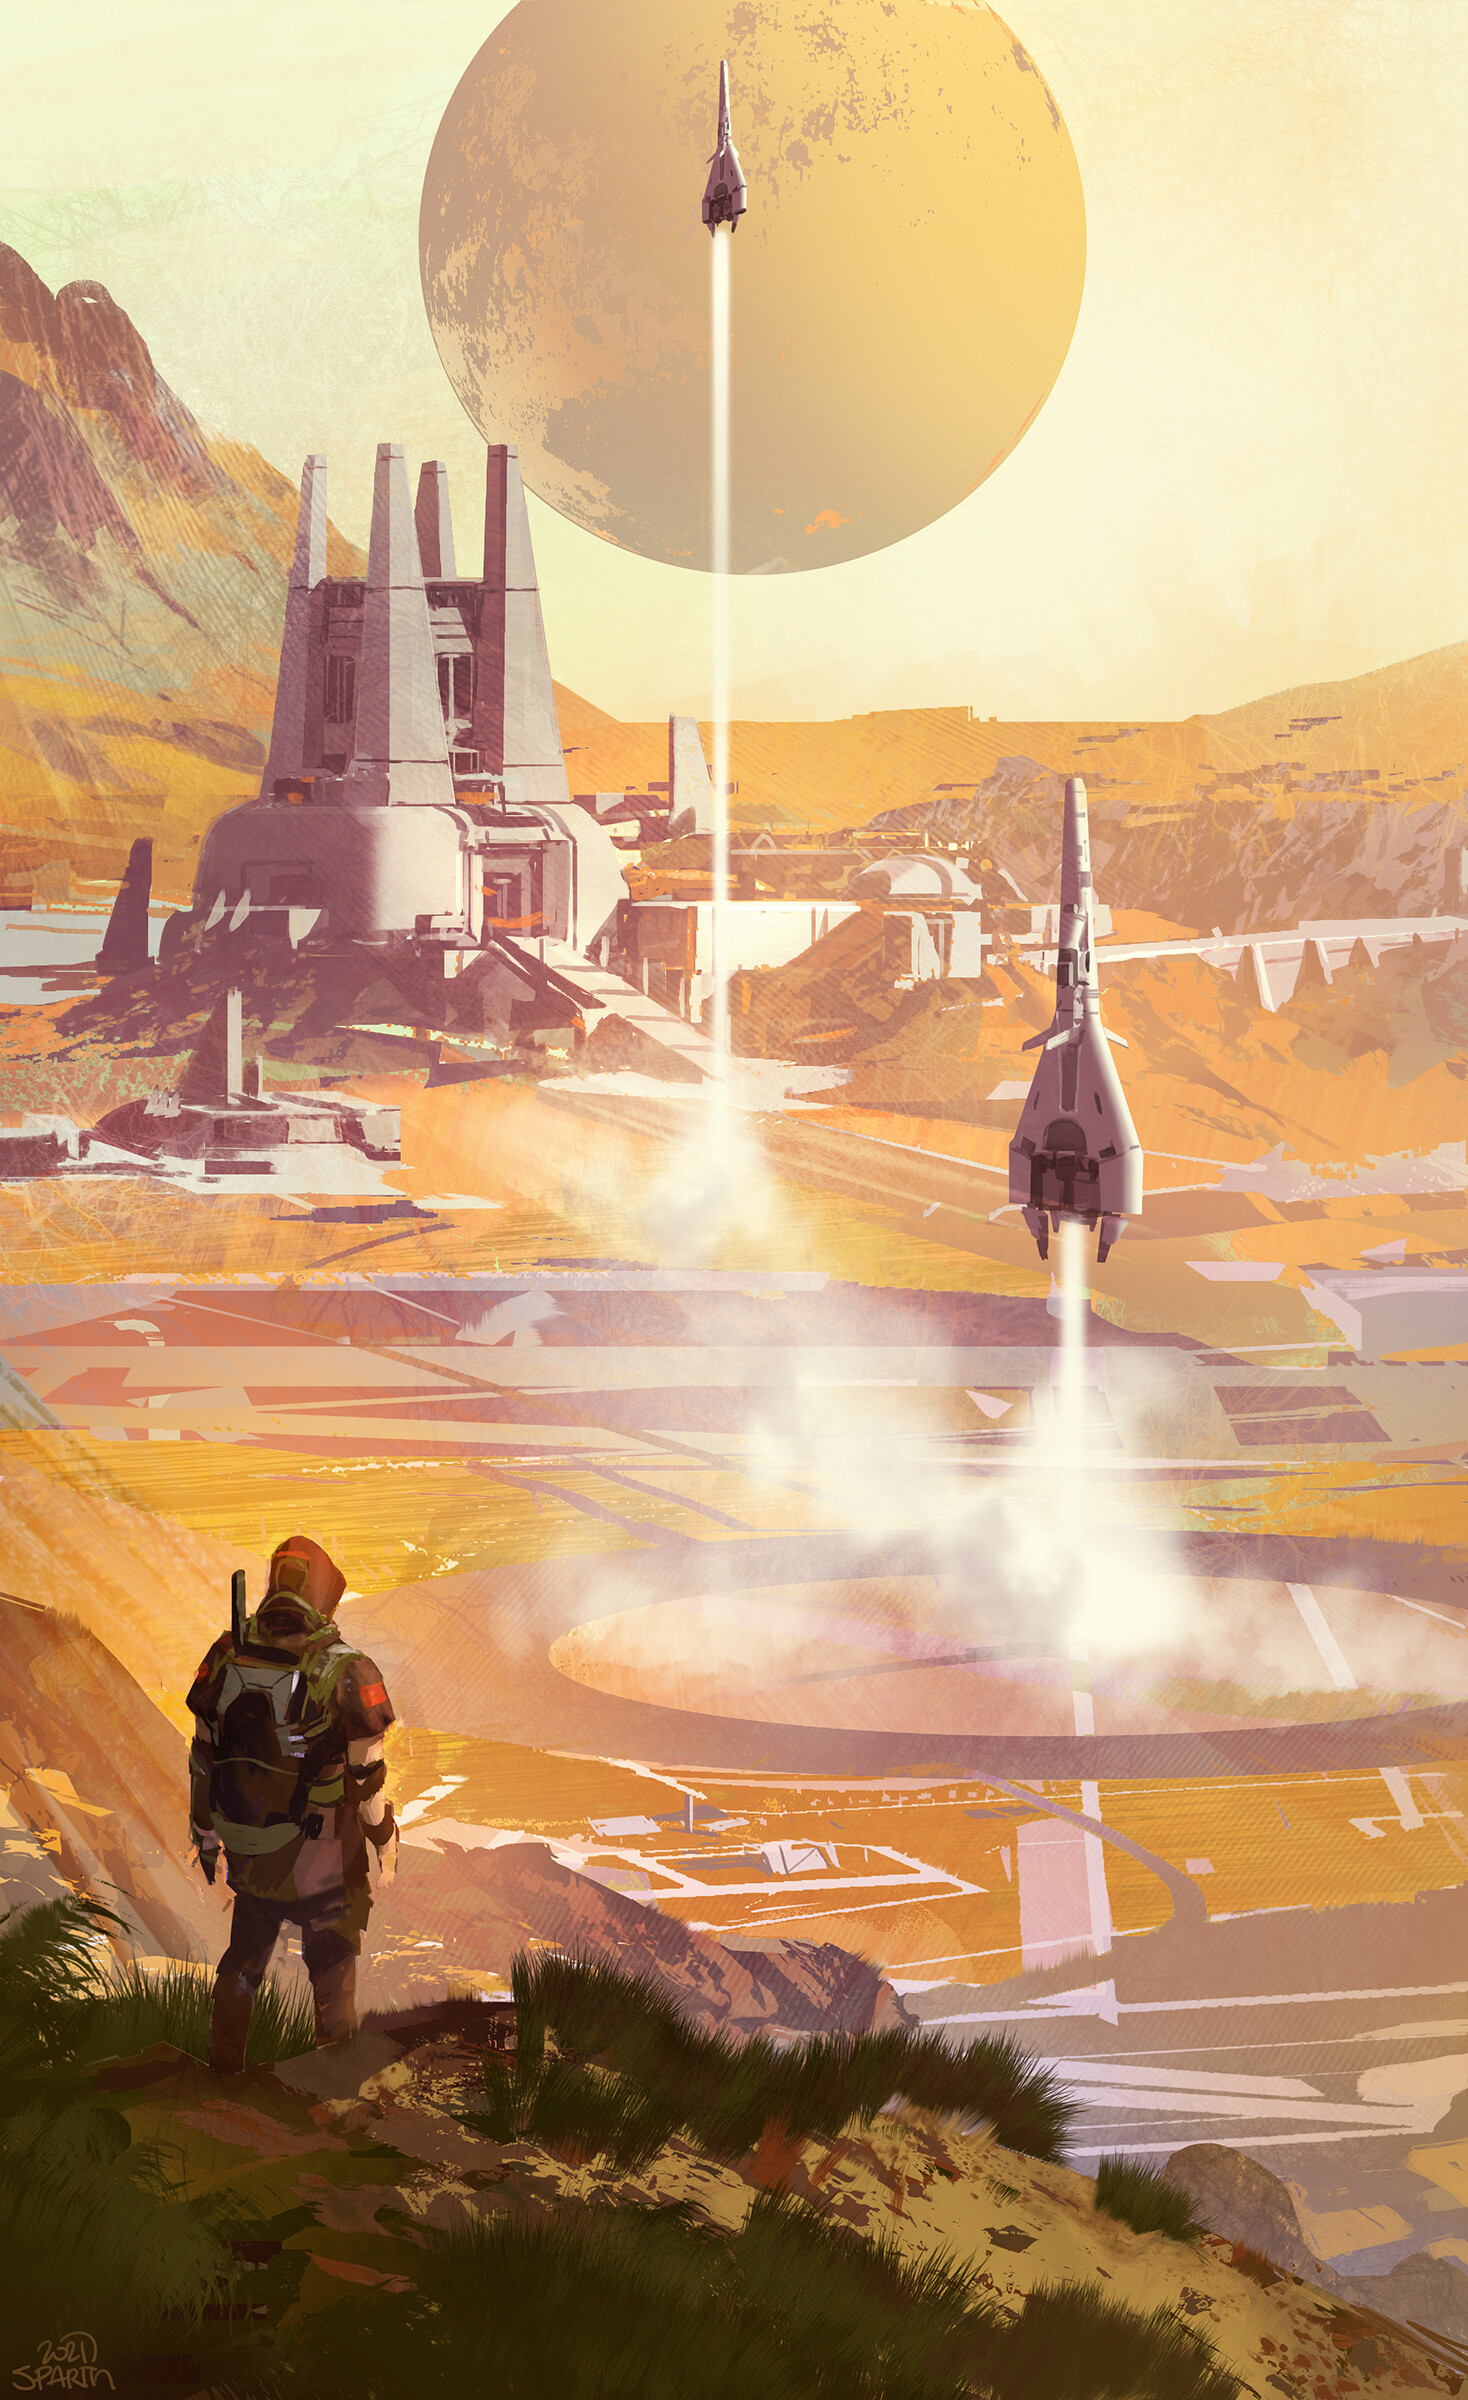 Jack Vance book cover - cover 01 by Sparth